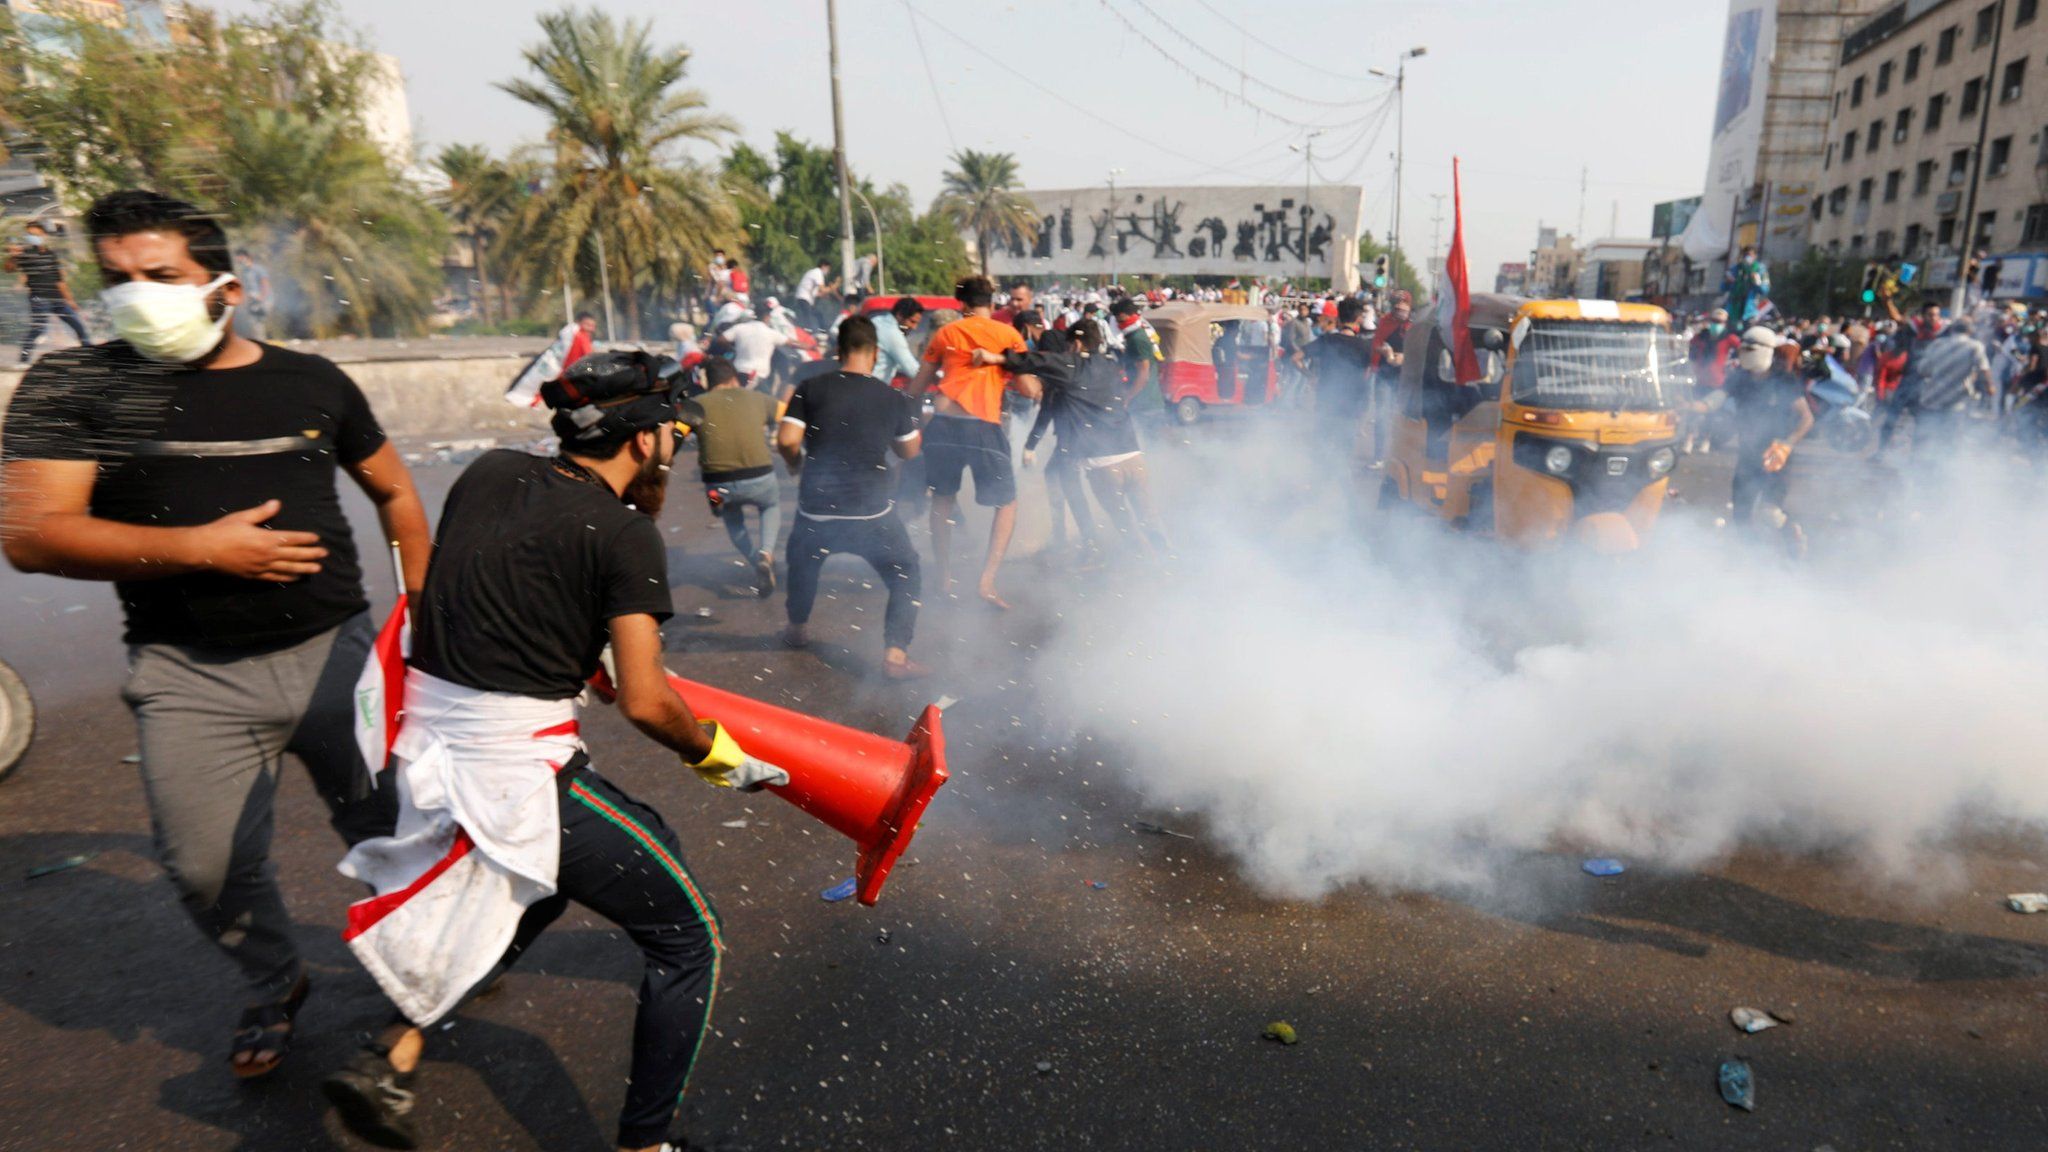 Anti-government protesters run from a tear-gas canister during a protest in Tahrir Square, Baghdad (28 October 2019)